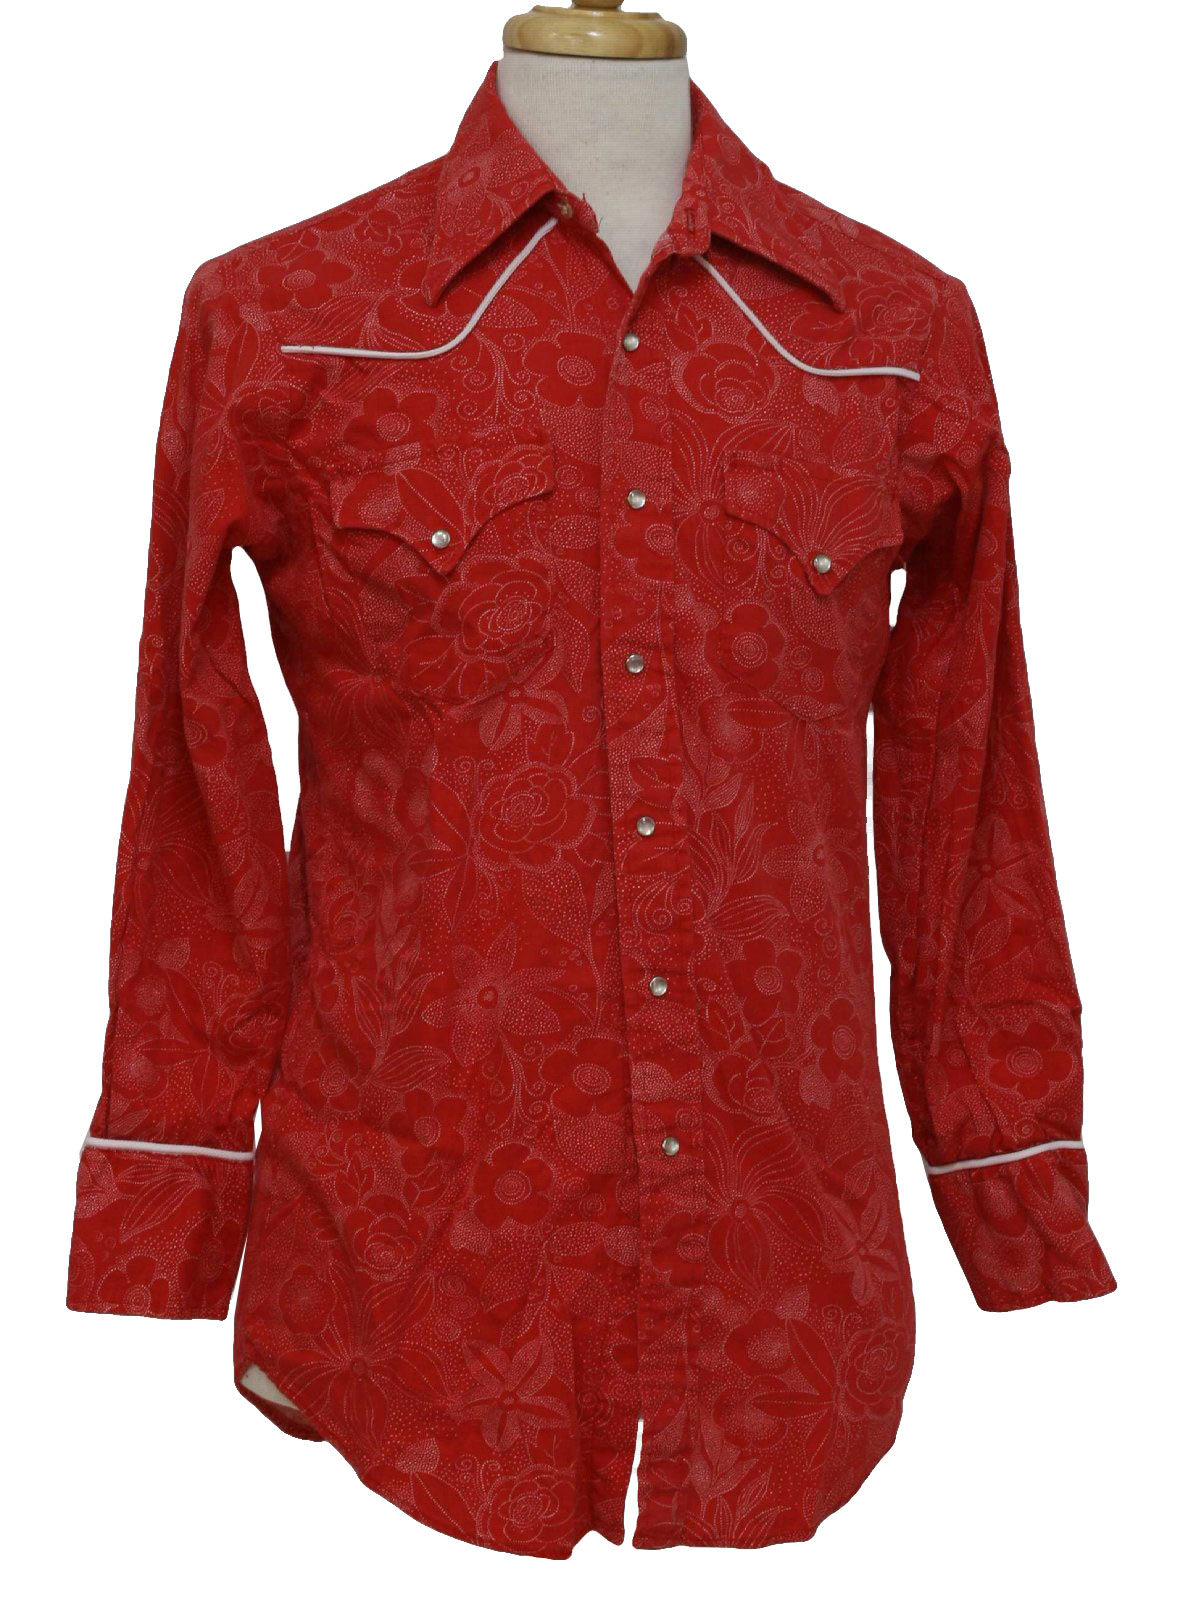 1970's Vintage Lee Western Shirt: 70s or early 80s -Lee- Mens red and ...